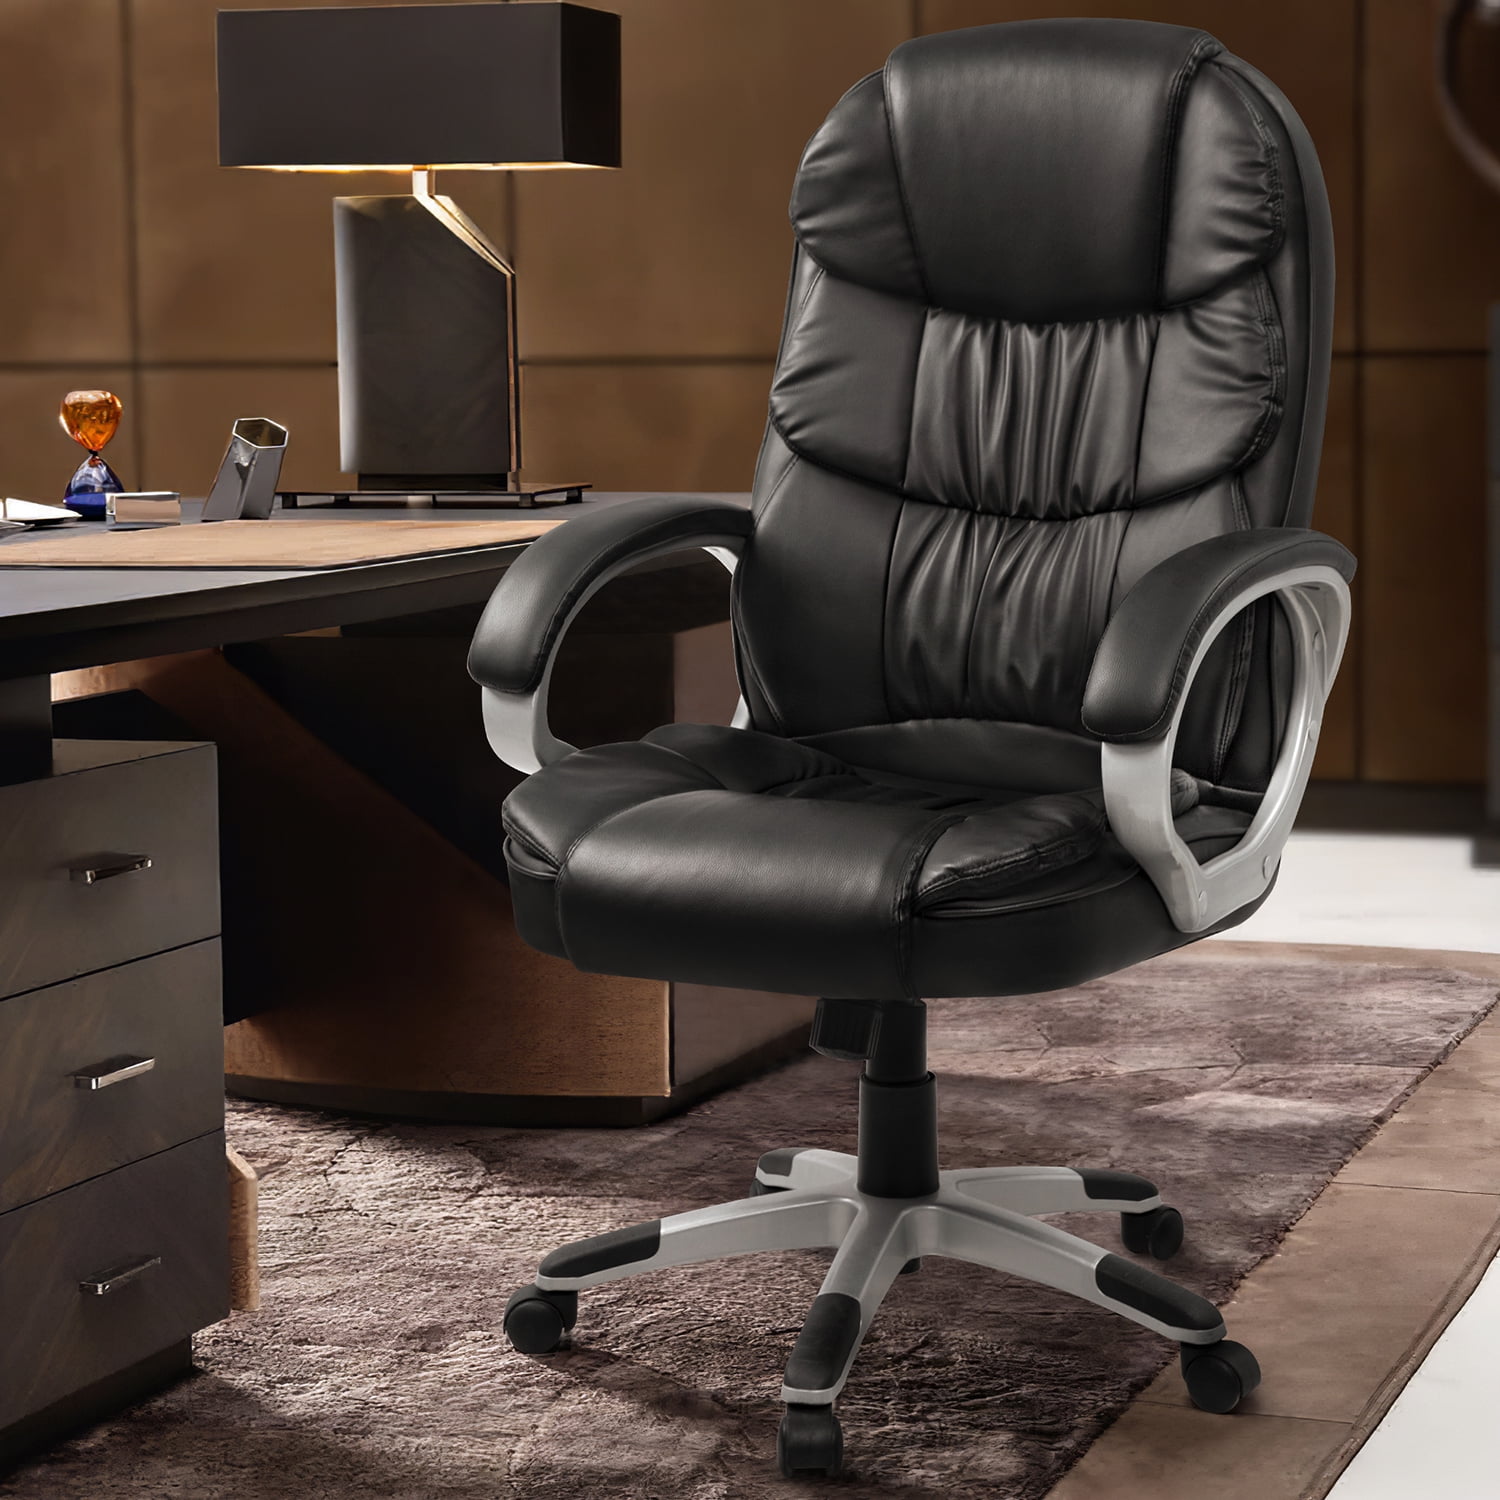 Lacoo Faux Leather High-Back Executive Office Chair with Lumbar Support,  Black